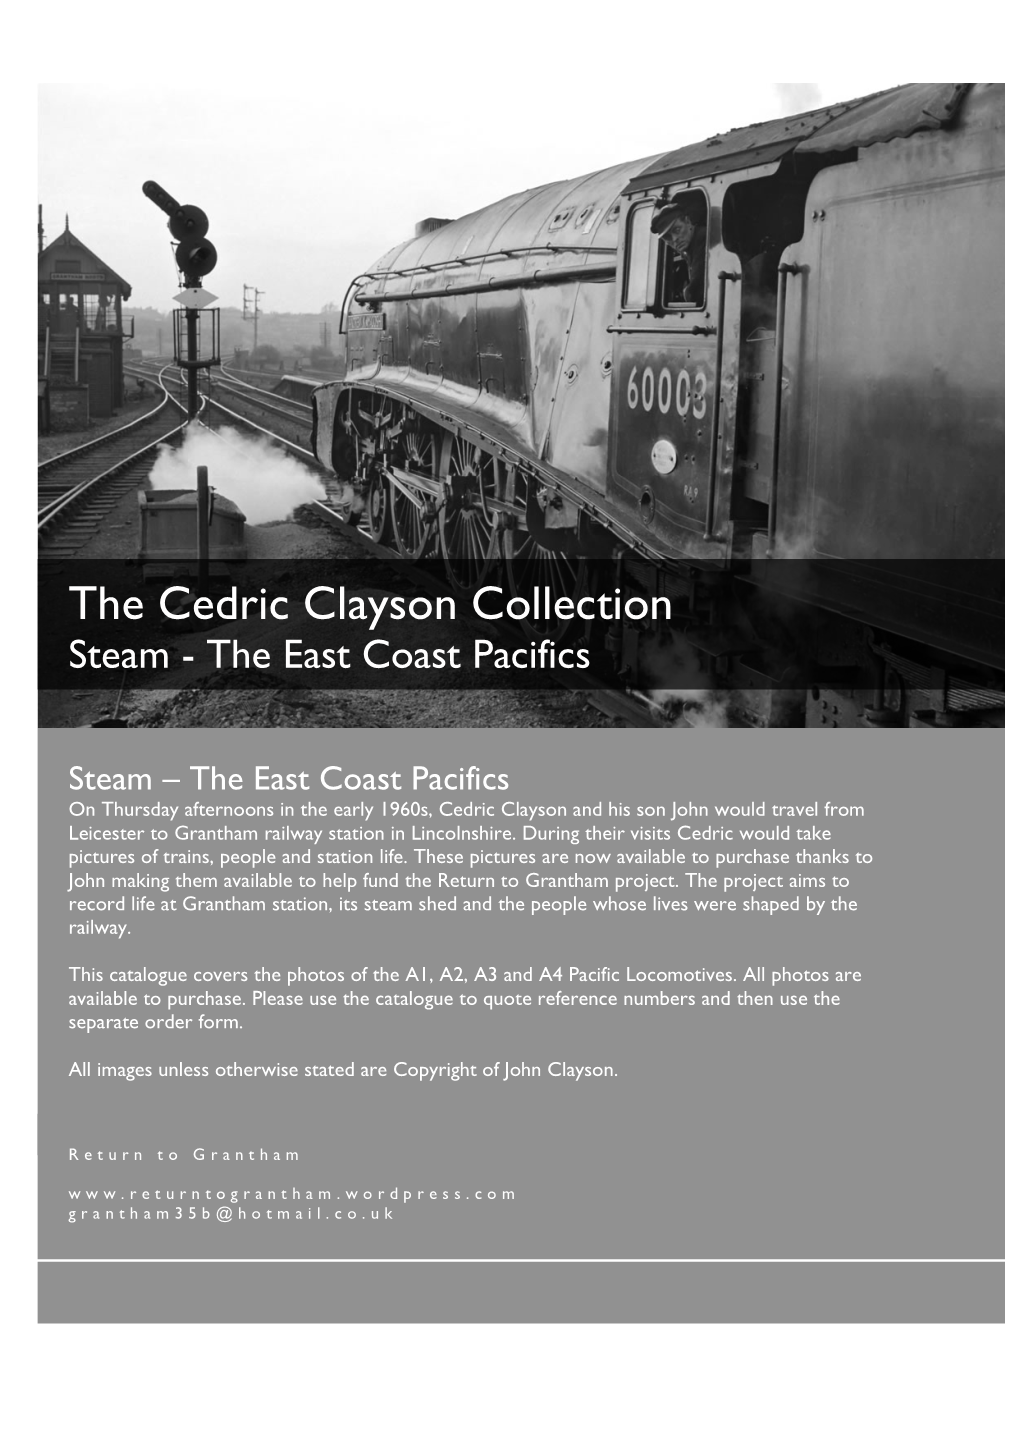 The Cedric Clayson Collection Steam - the East Coast Pacifics